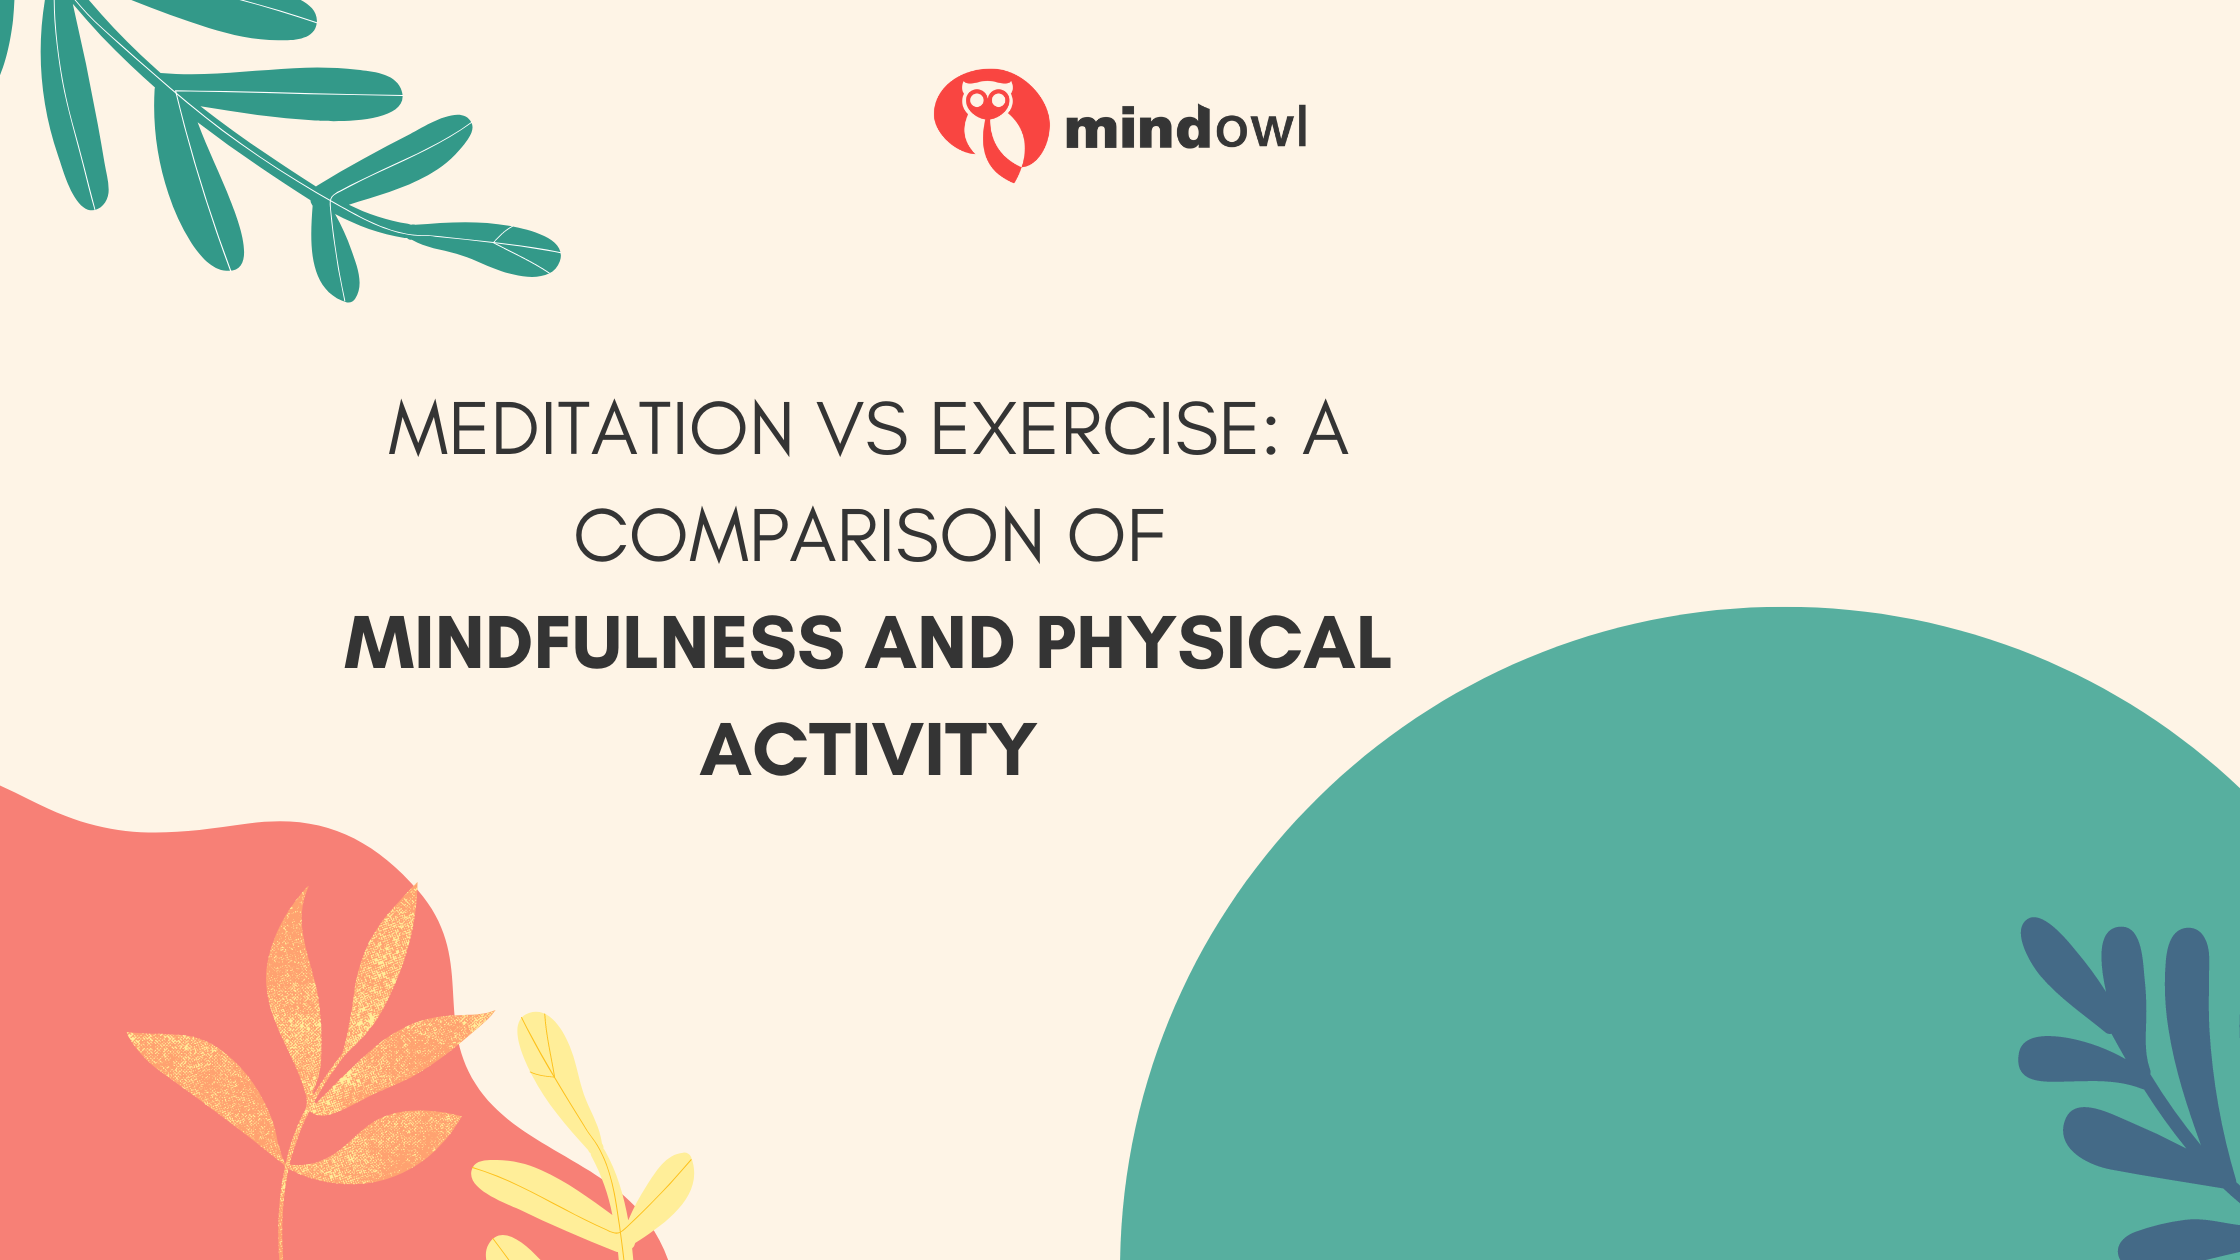 Meditation Vs Exercise: A Comparison Of Mindfulness And Physical Activity